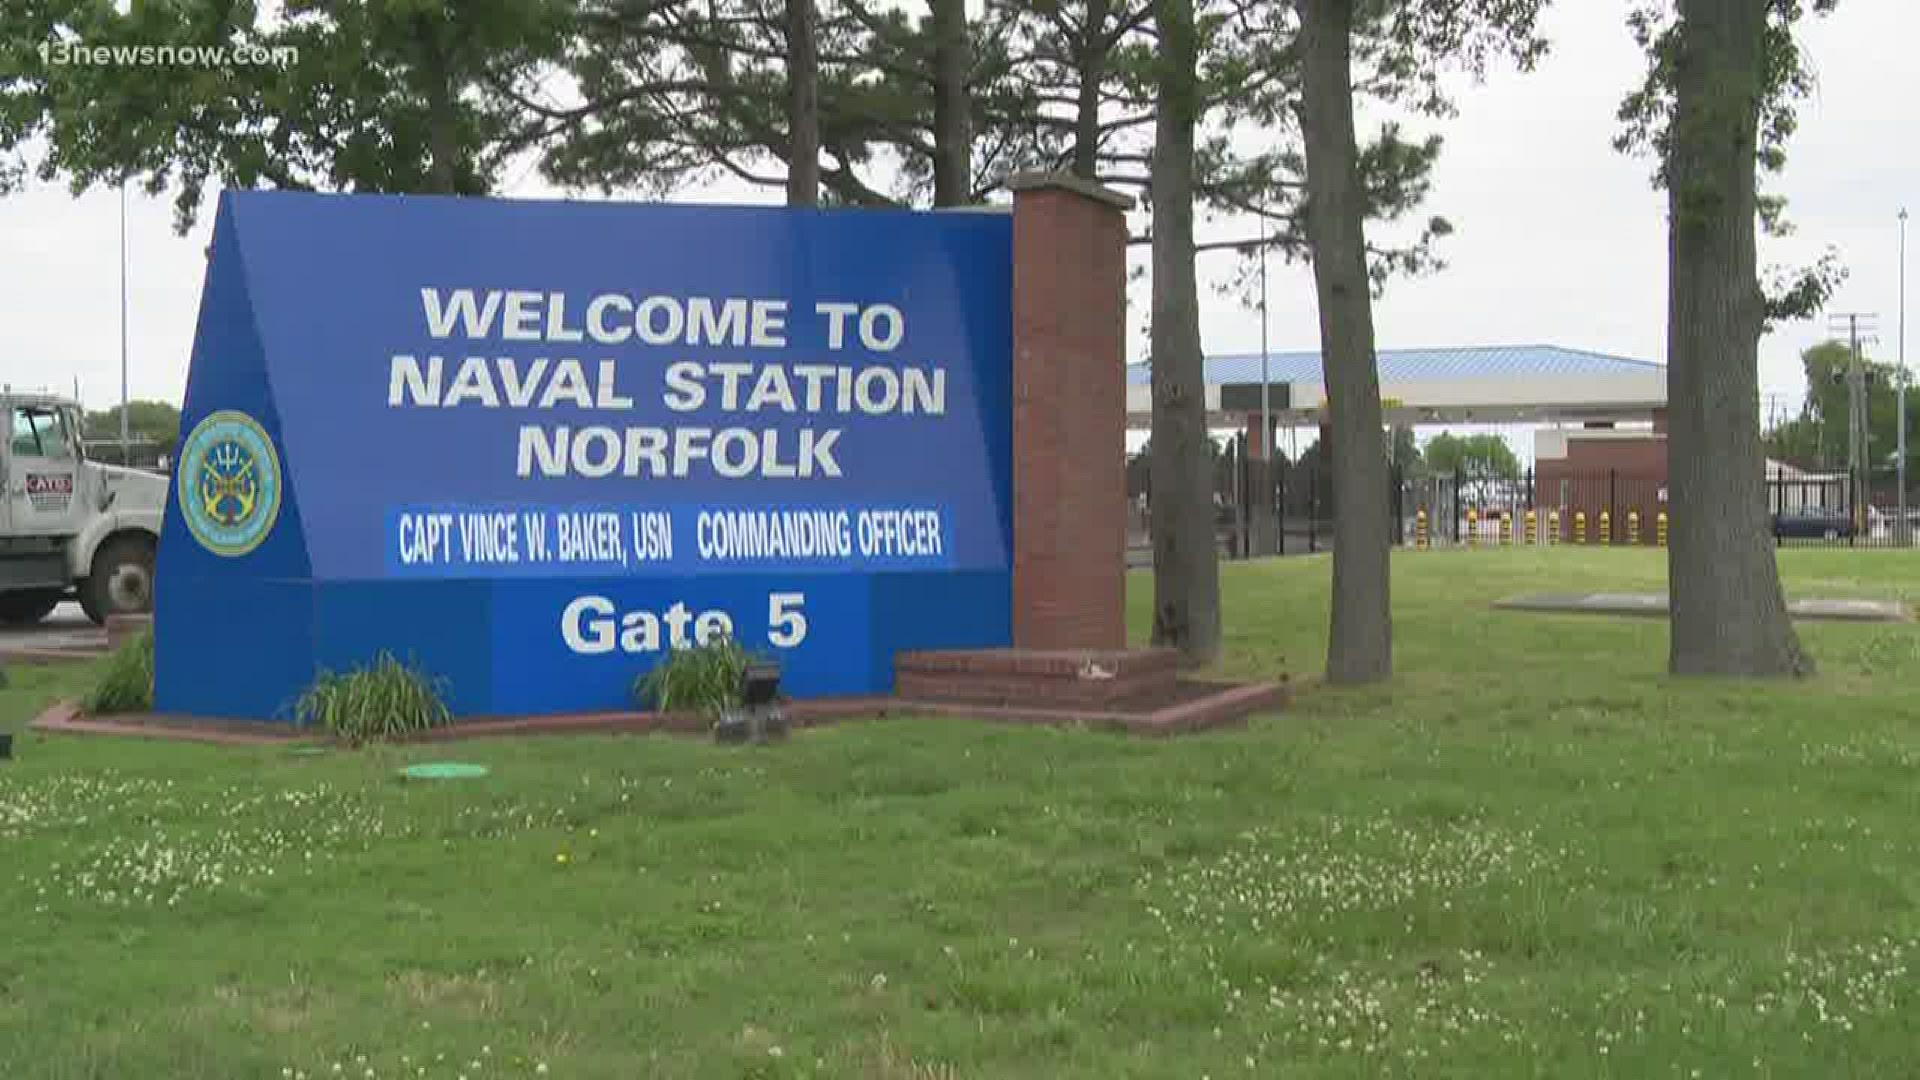 Someone tried to enter Naval Station Norfolk without authorization with a stolen vehicle. Police learned the car was stolen from Virginia Beach.